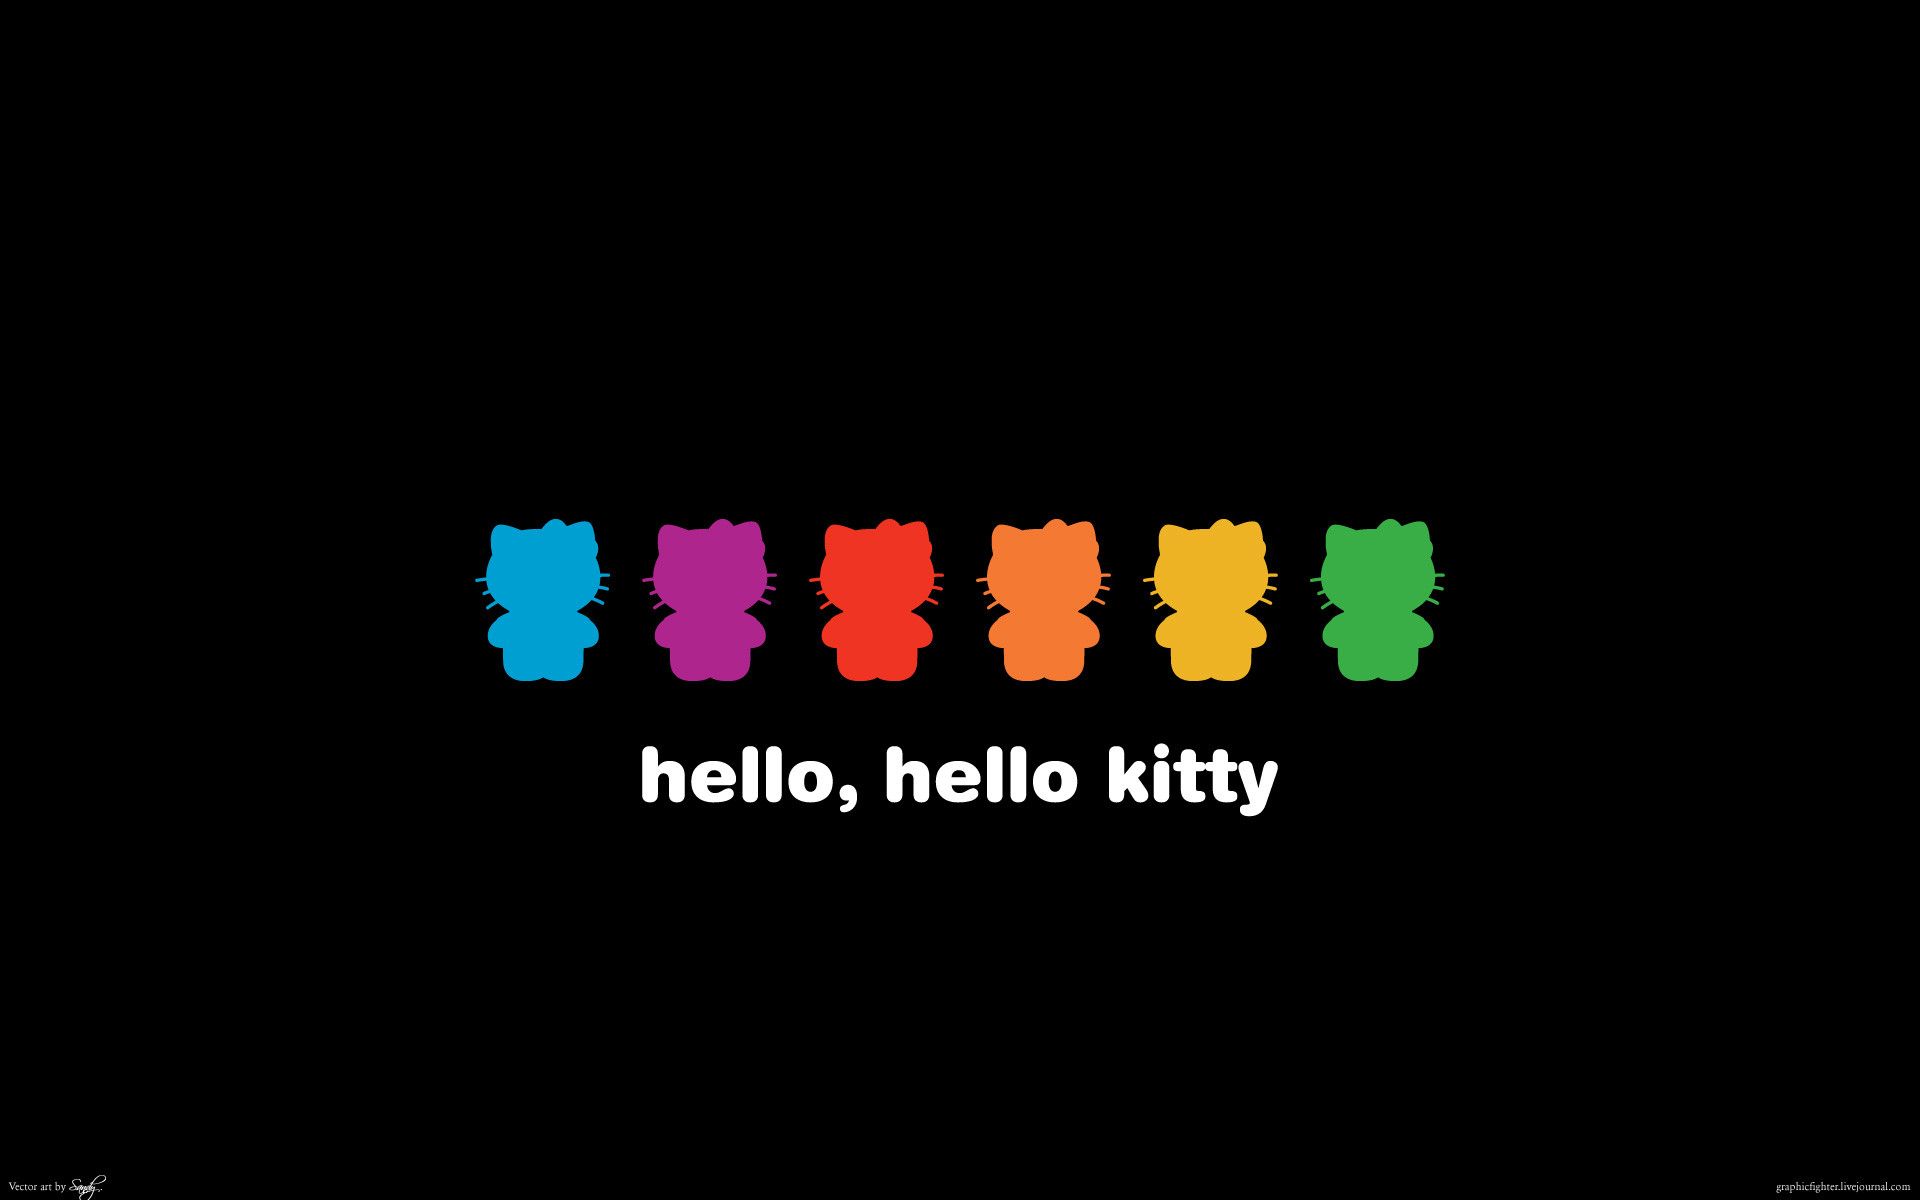 Hello Kitty wallpaper with colorful cats on a black background - Hello Kitty